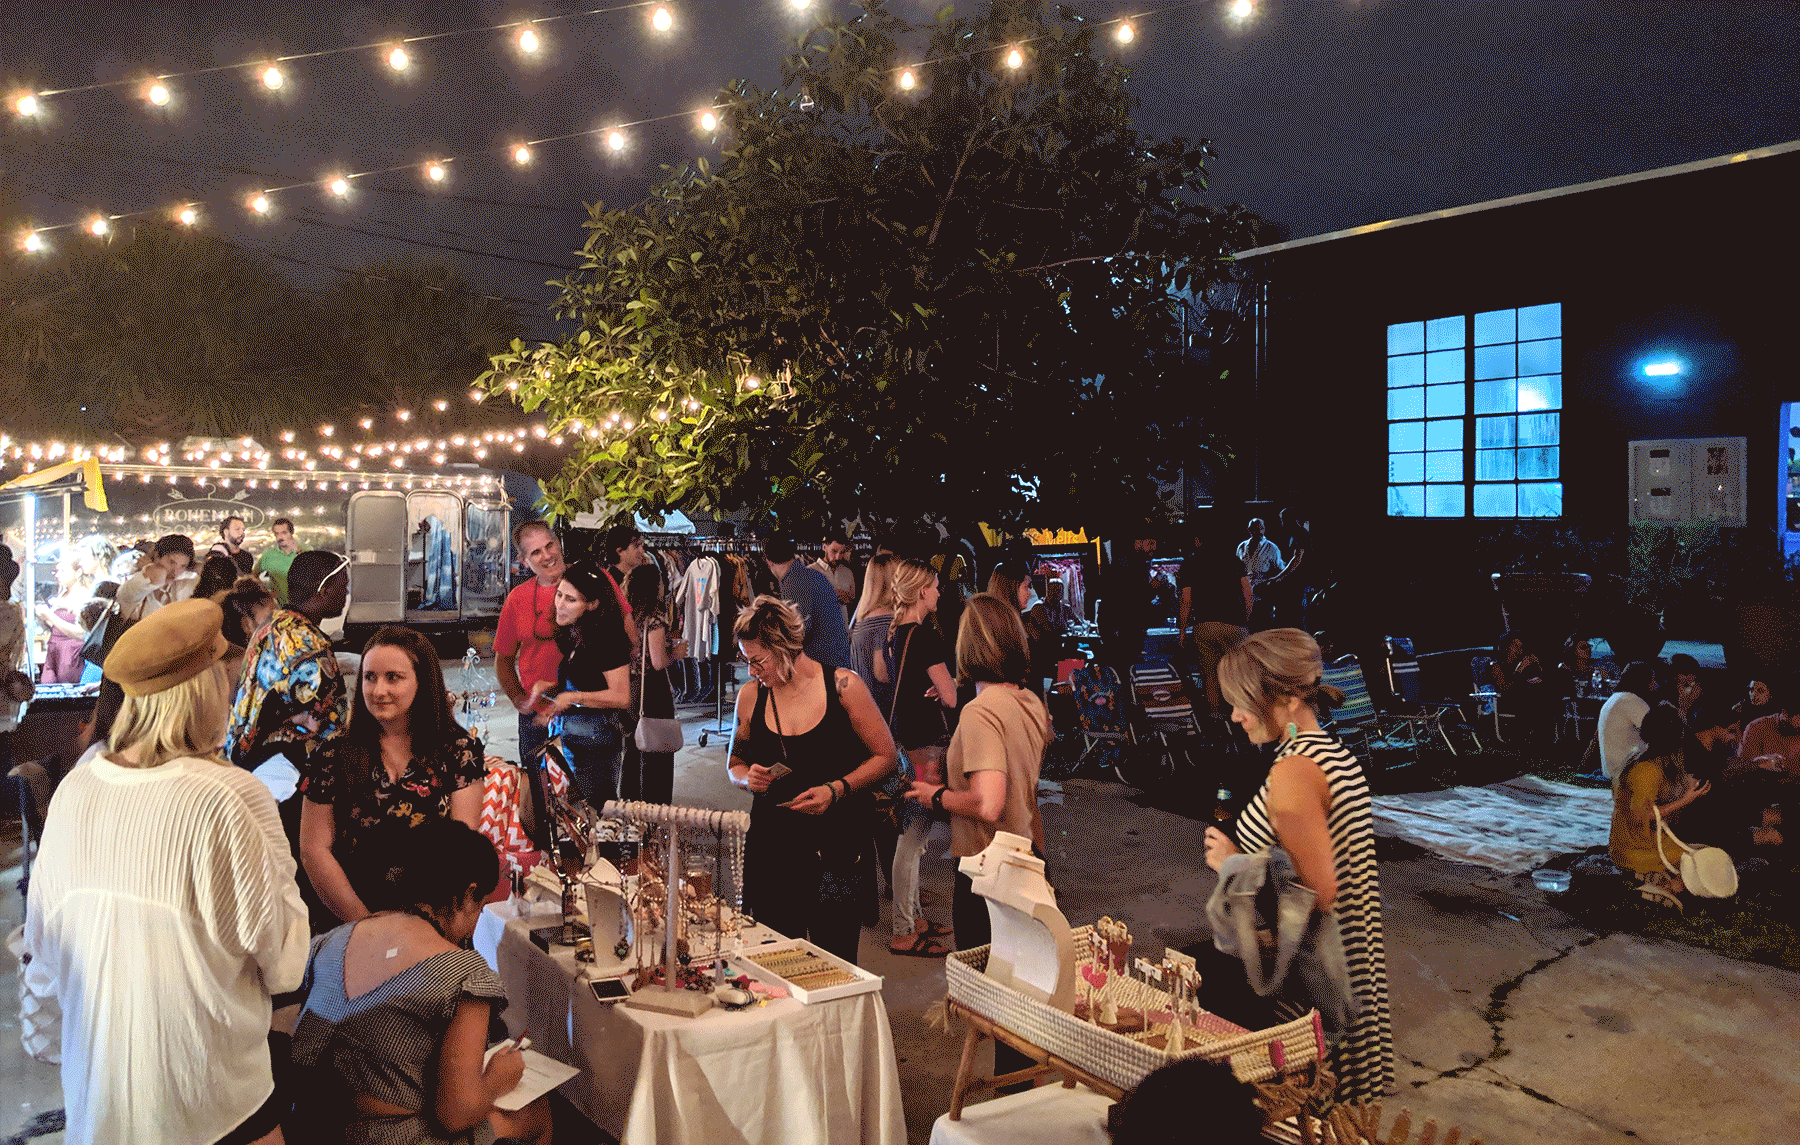 Crowd of party-goers are relaxing under the lights and night sky at Elizabeth Ave Station's pop-up event in West Palm Beach, FL.